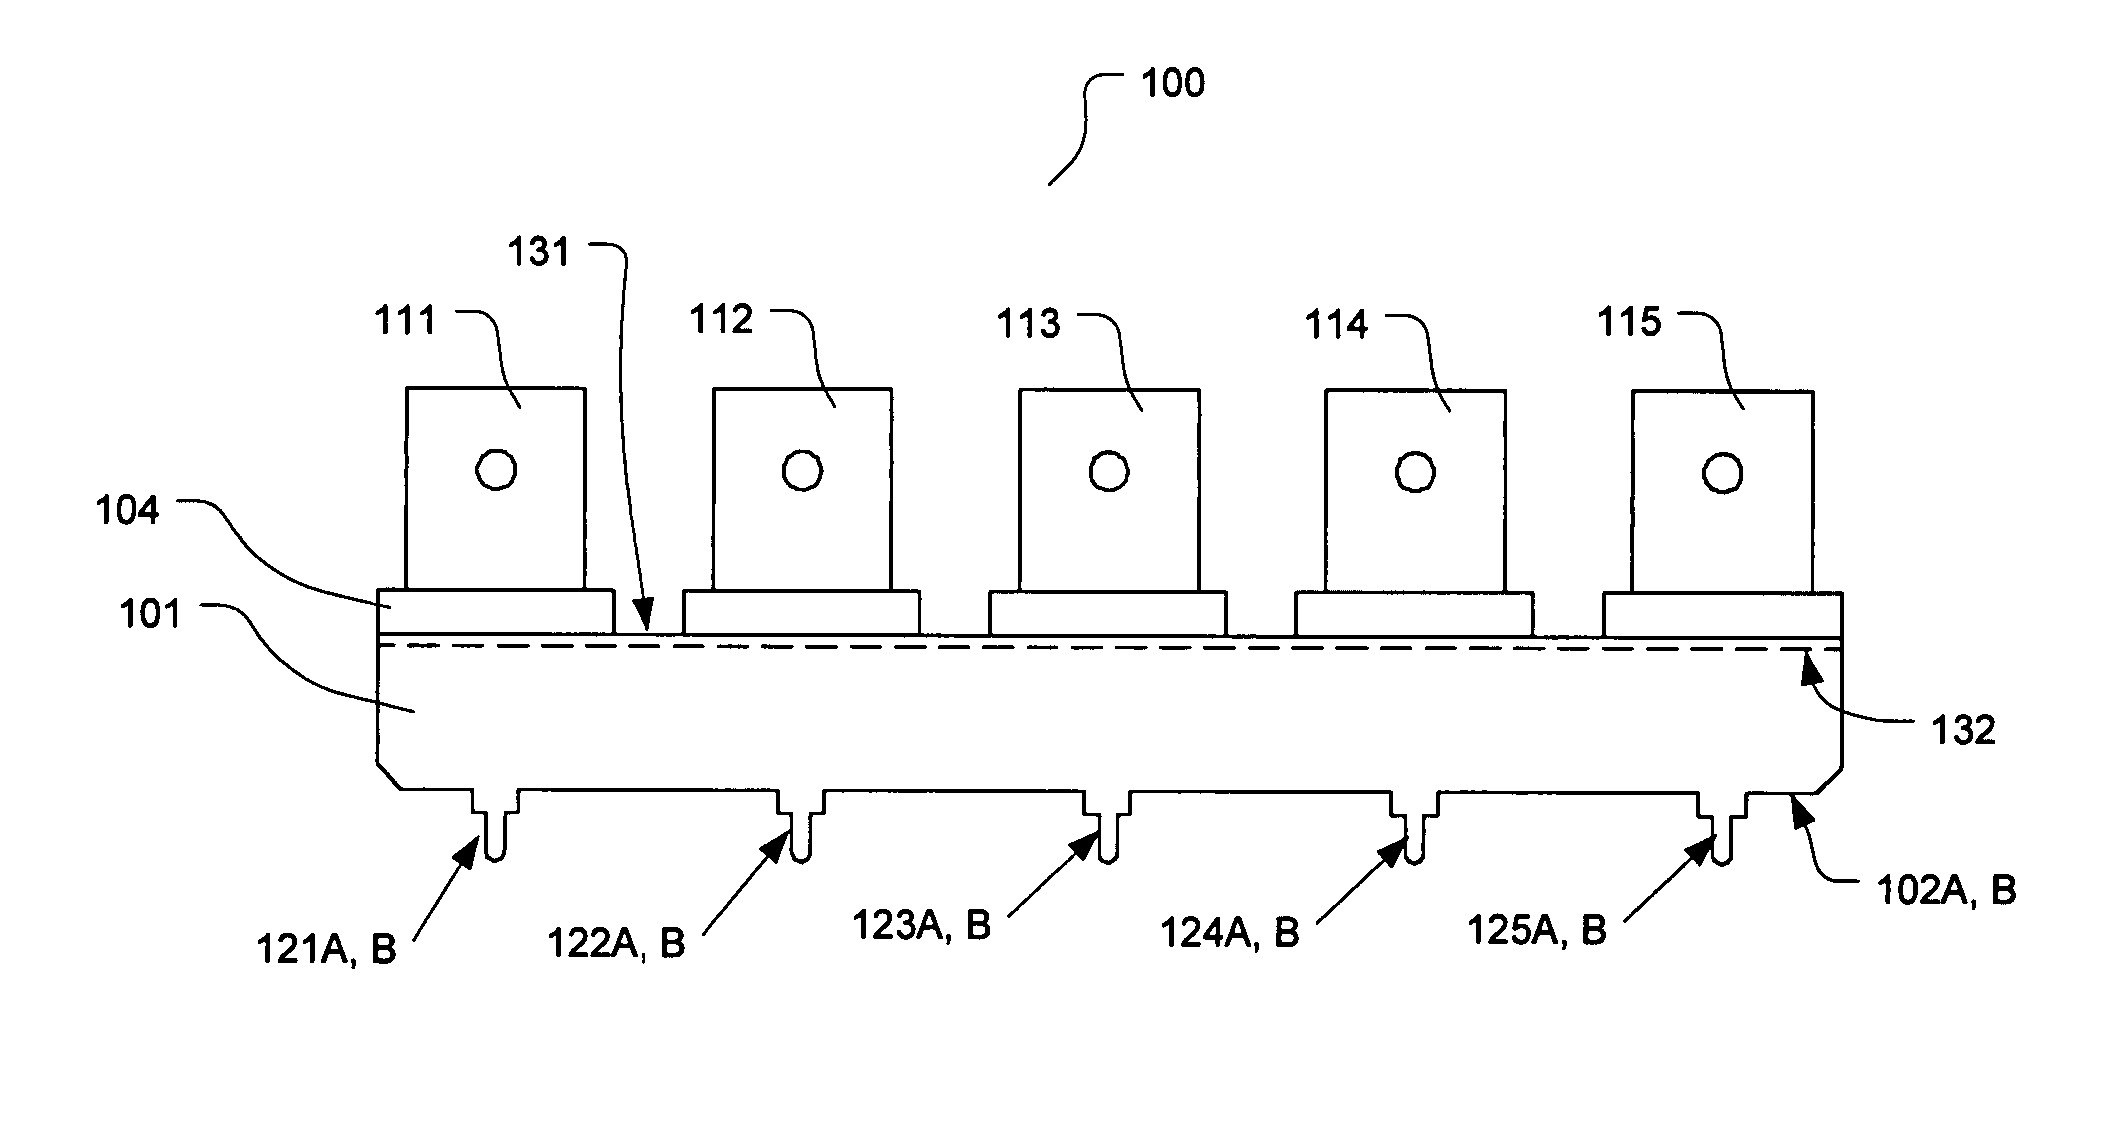 Connector assembly apparatus for electronic equipment and method for using same